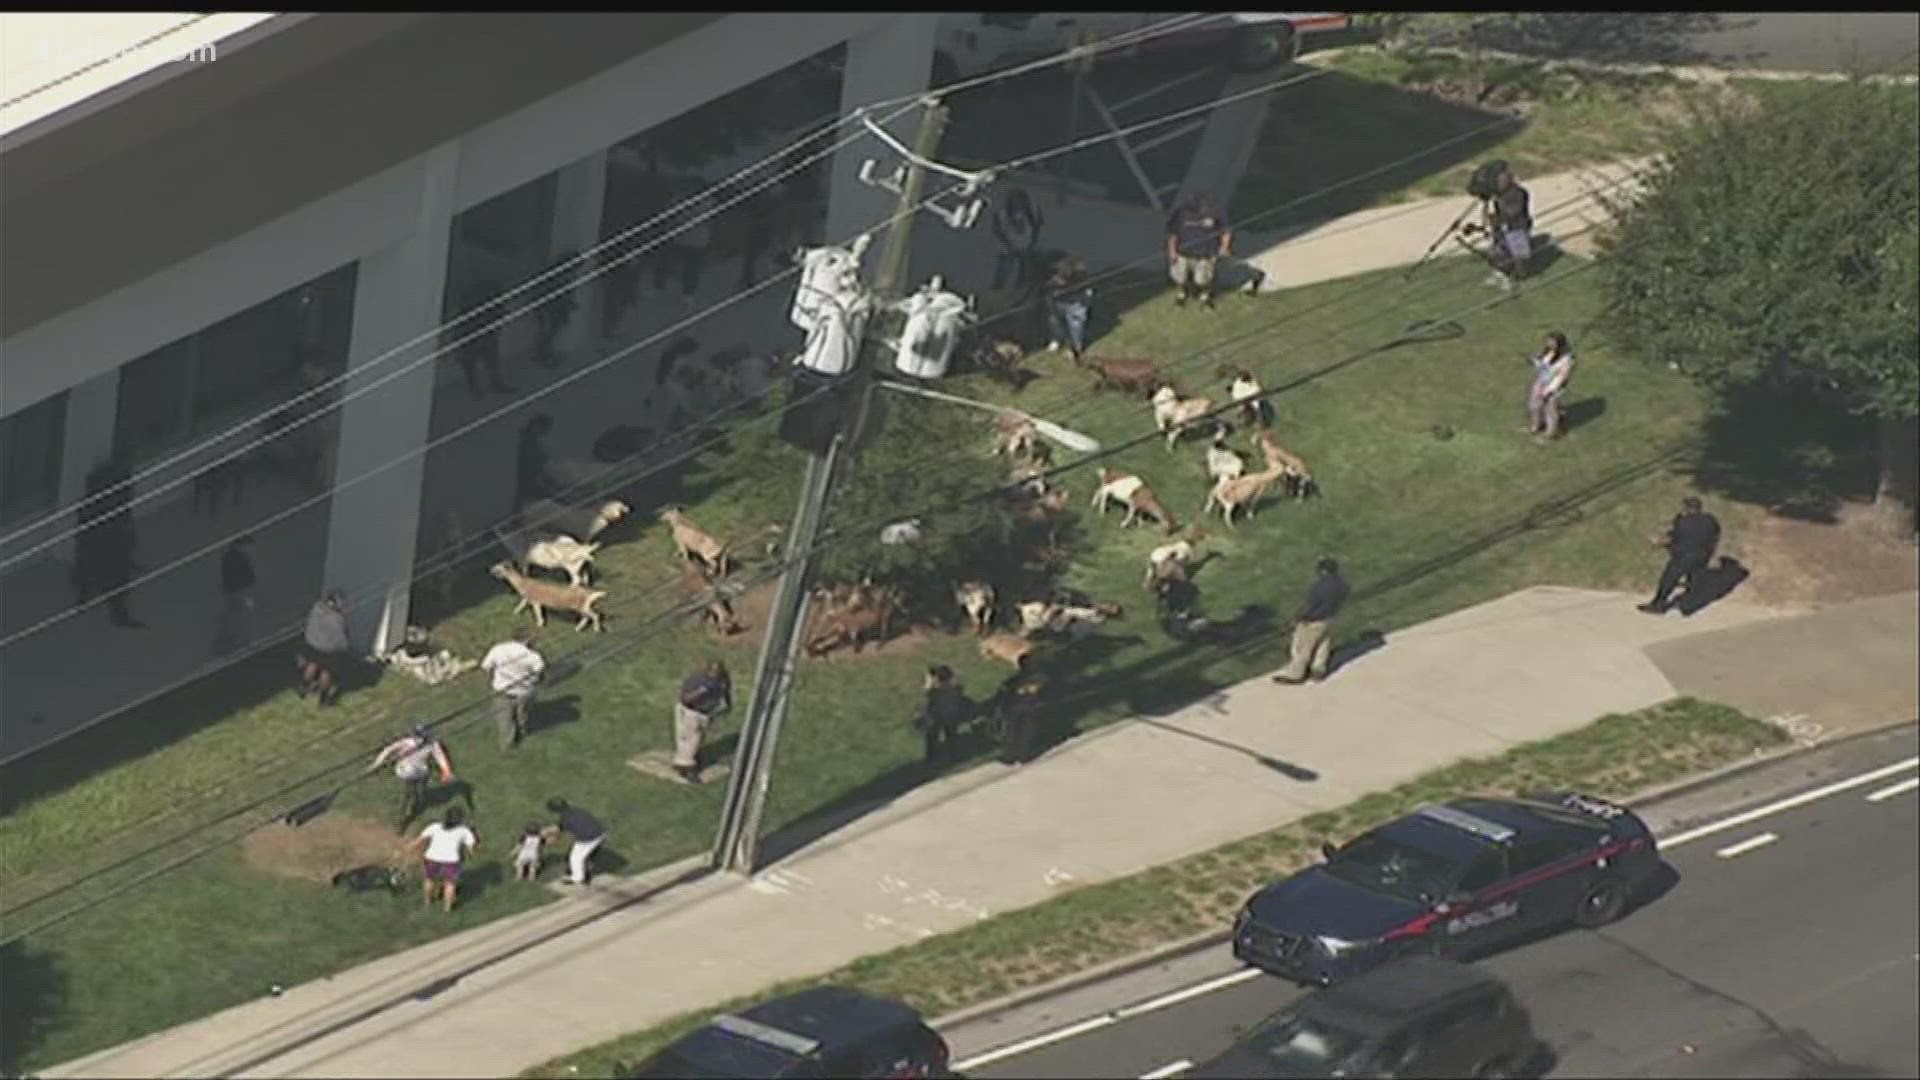 There are nearly two dozen goats near the Rooms to Go store on Piedmont Road.